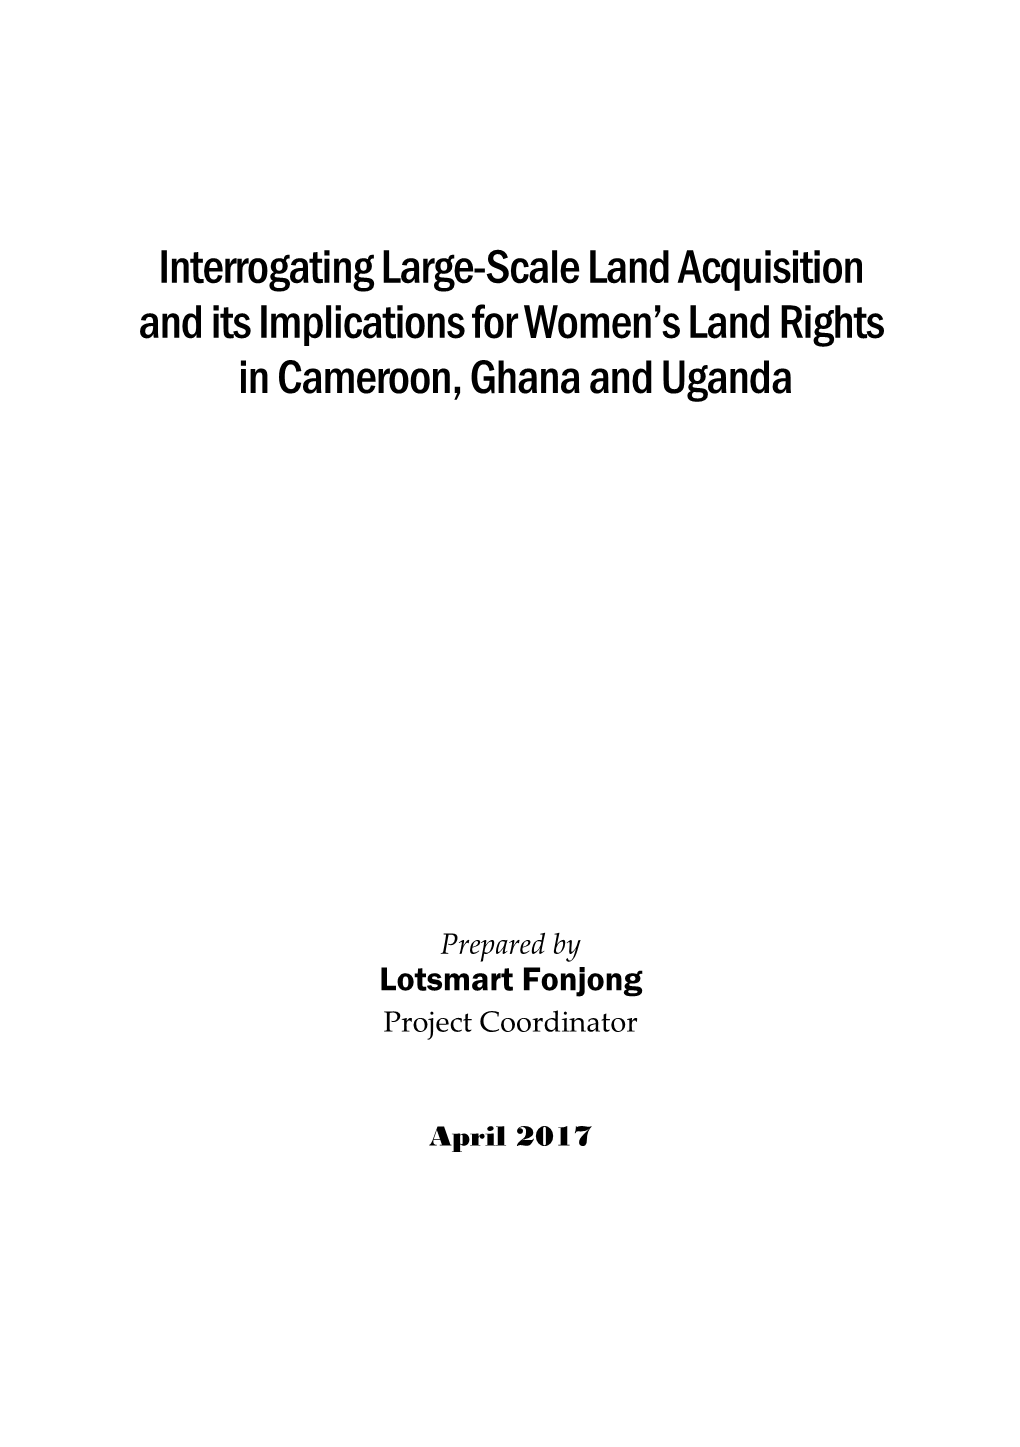 Interrogating Large-Scale Land Acquisition and Its Implications for Women’S Land Rights in Cameroon, Ghana and Uganda